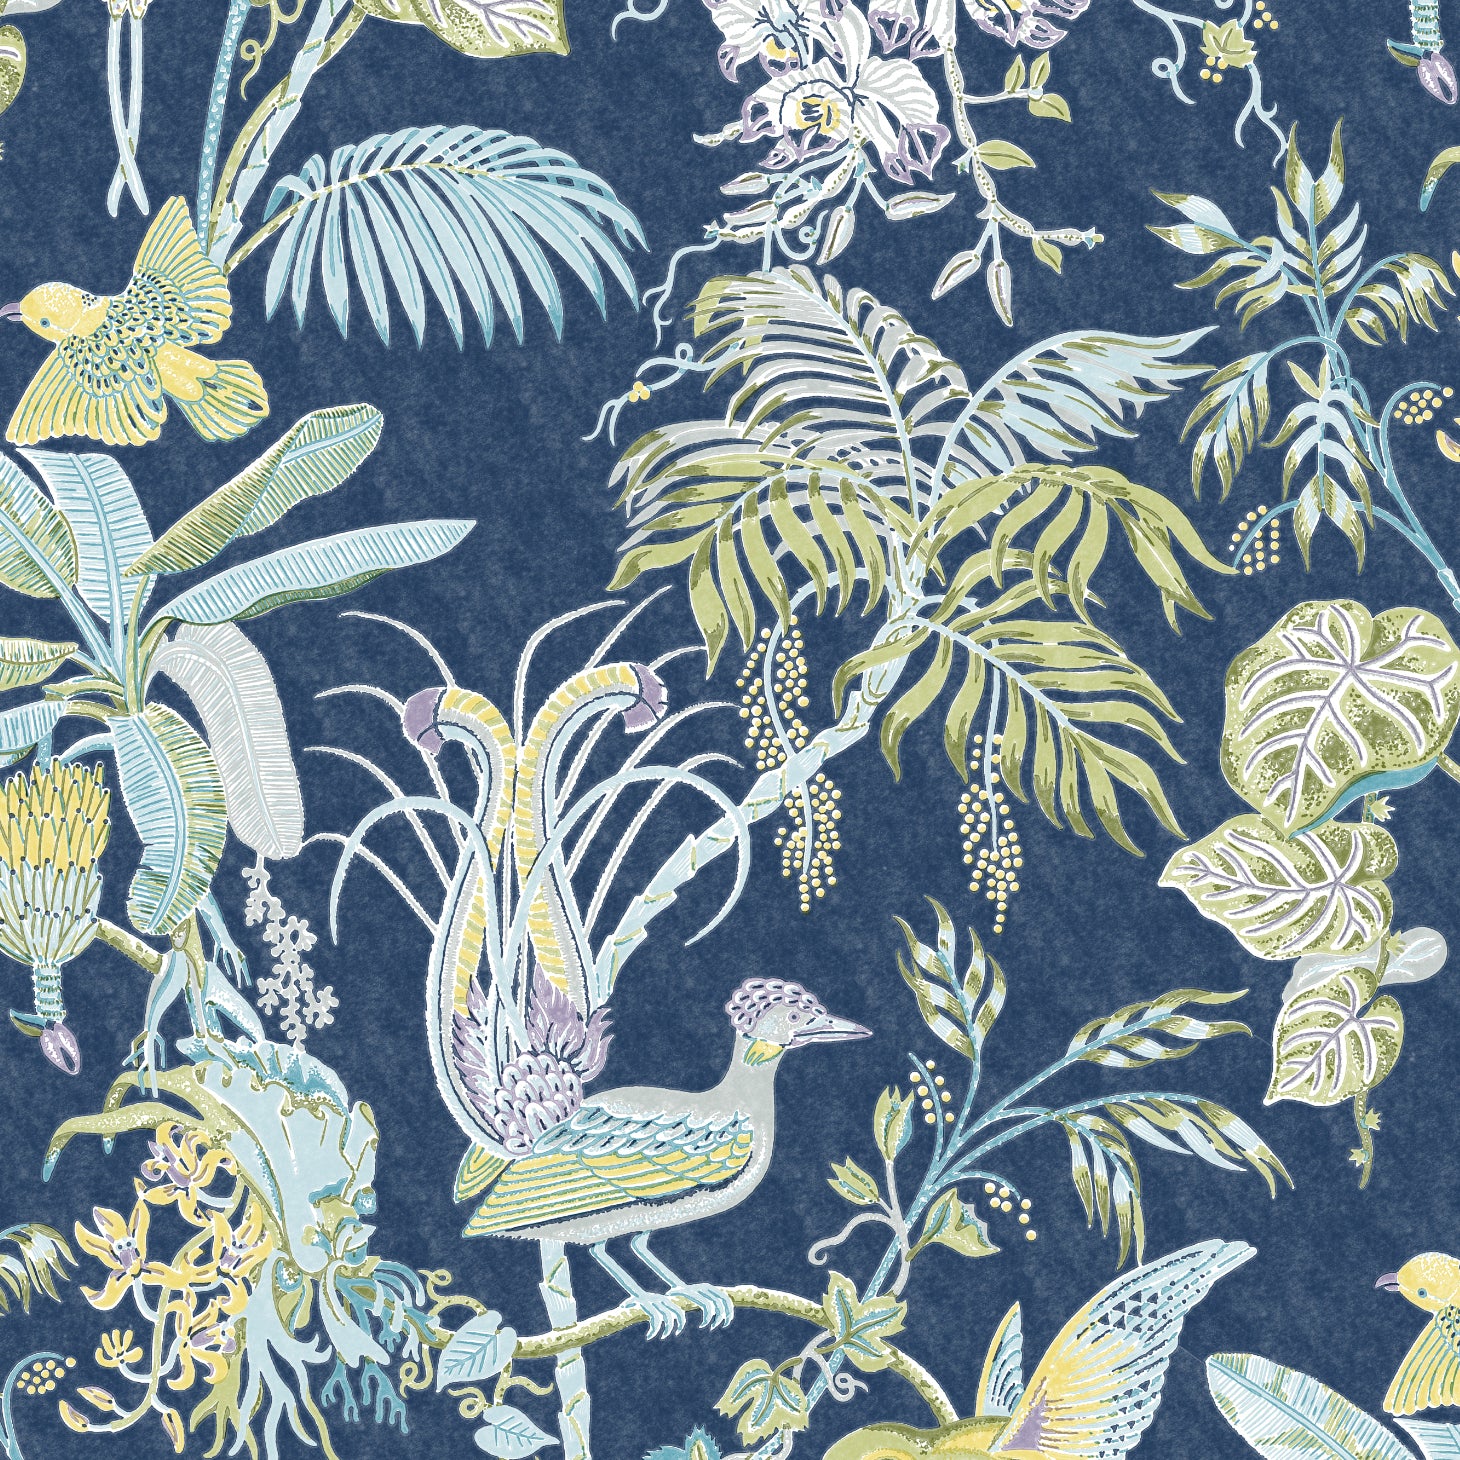 Detail of wallpaper in a dense bird and botanical print in shades of yellow and blue on a navy field.